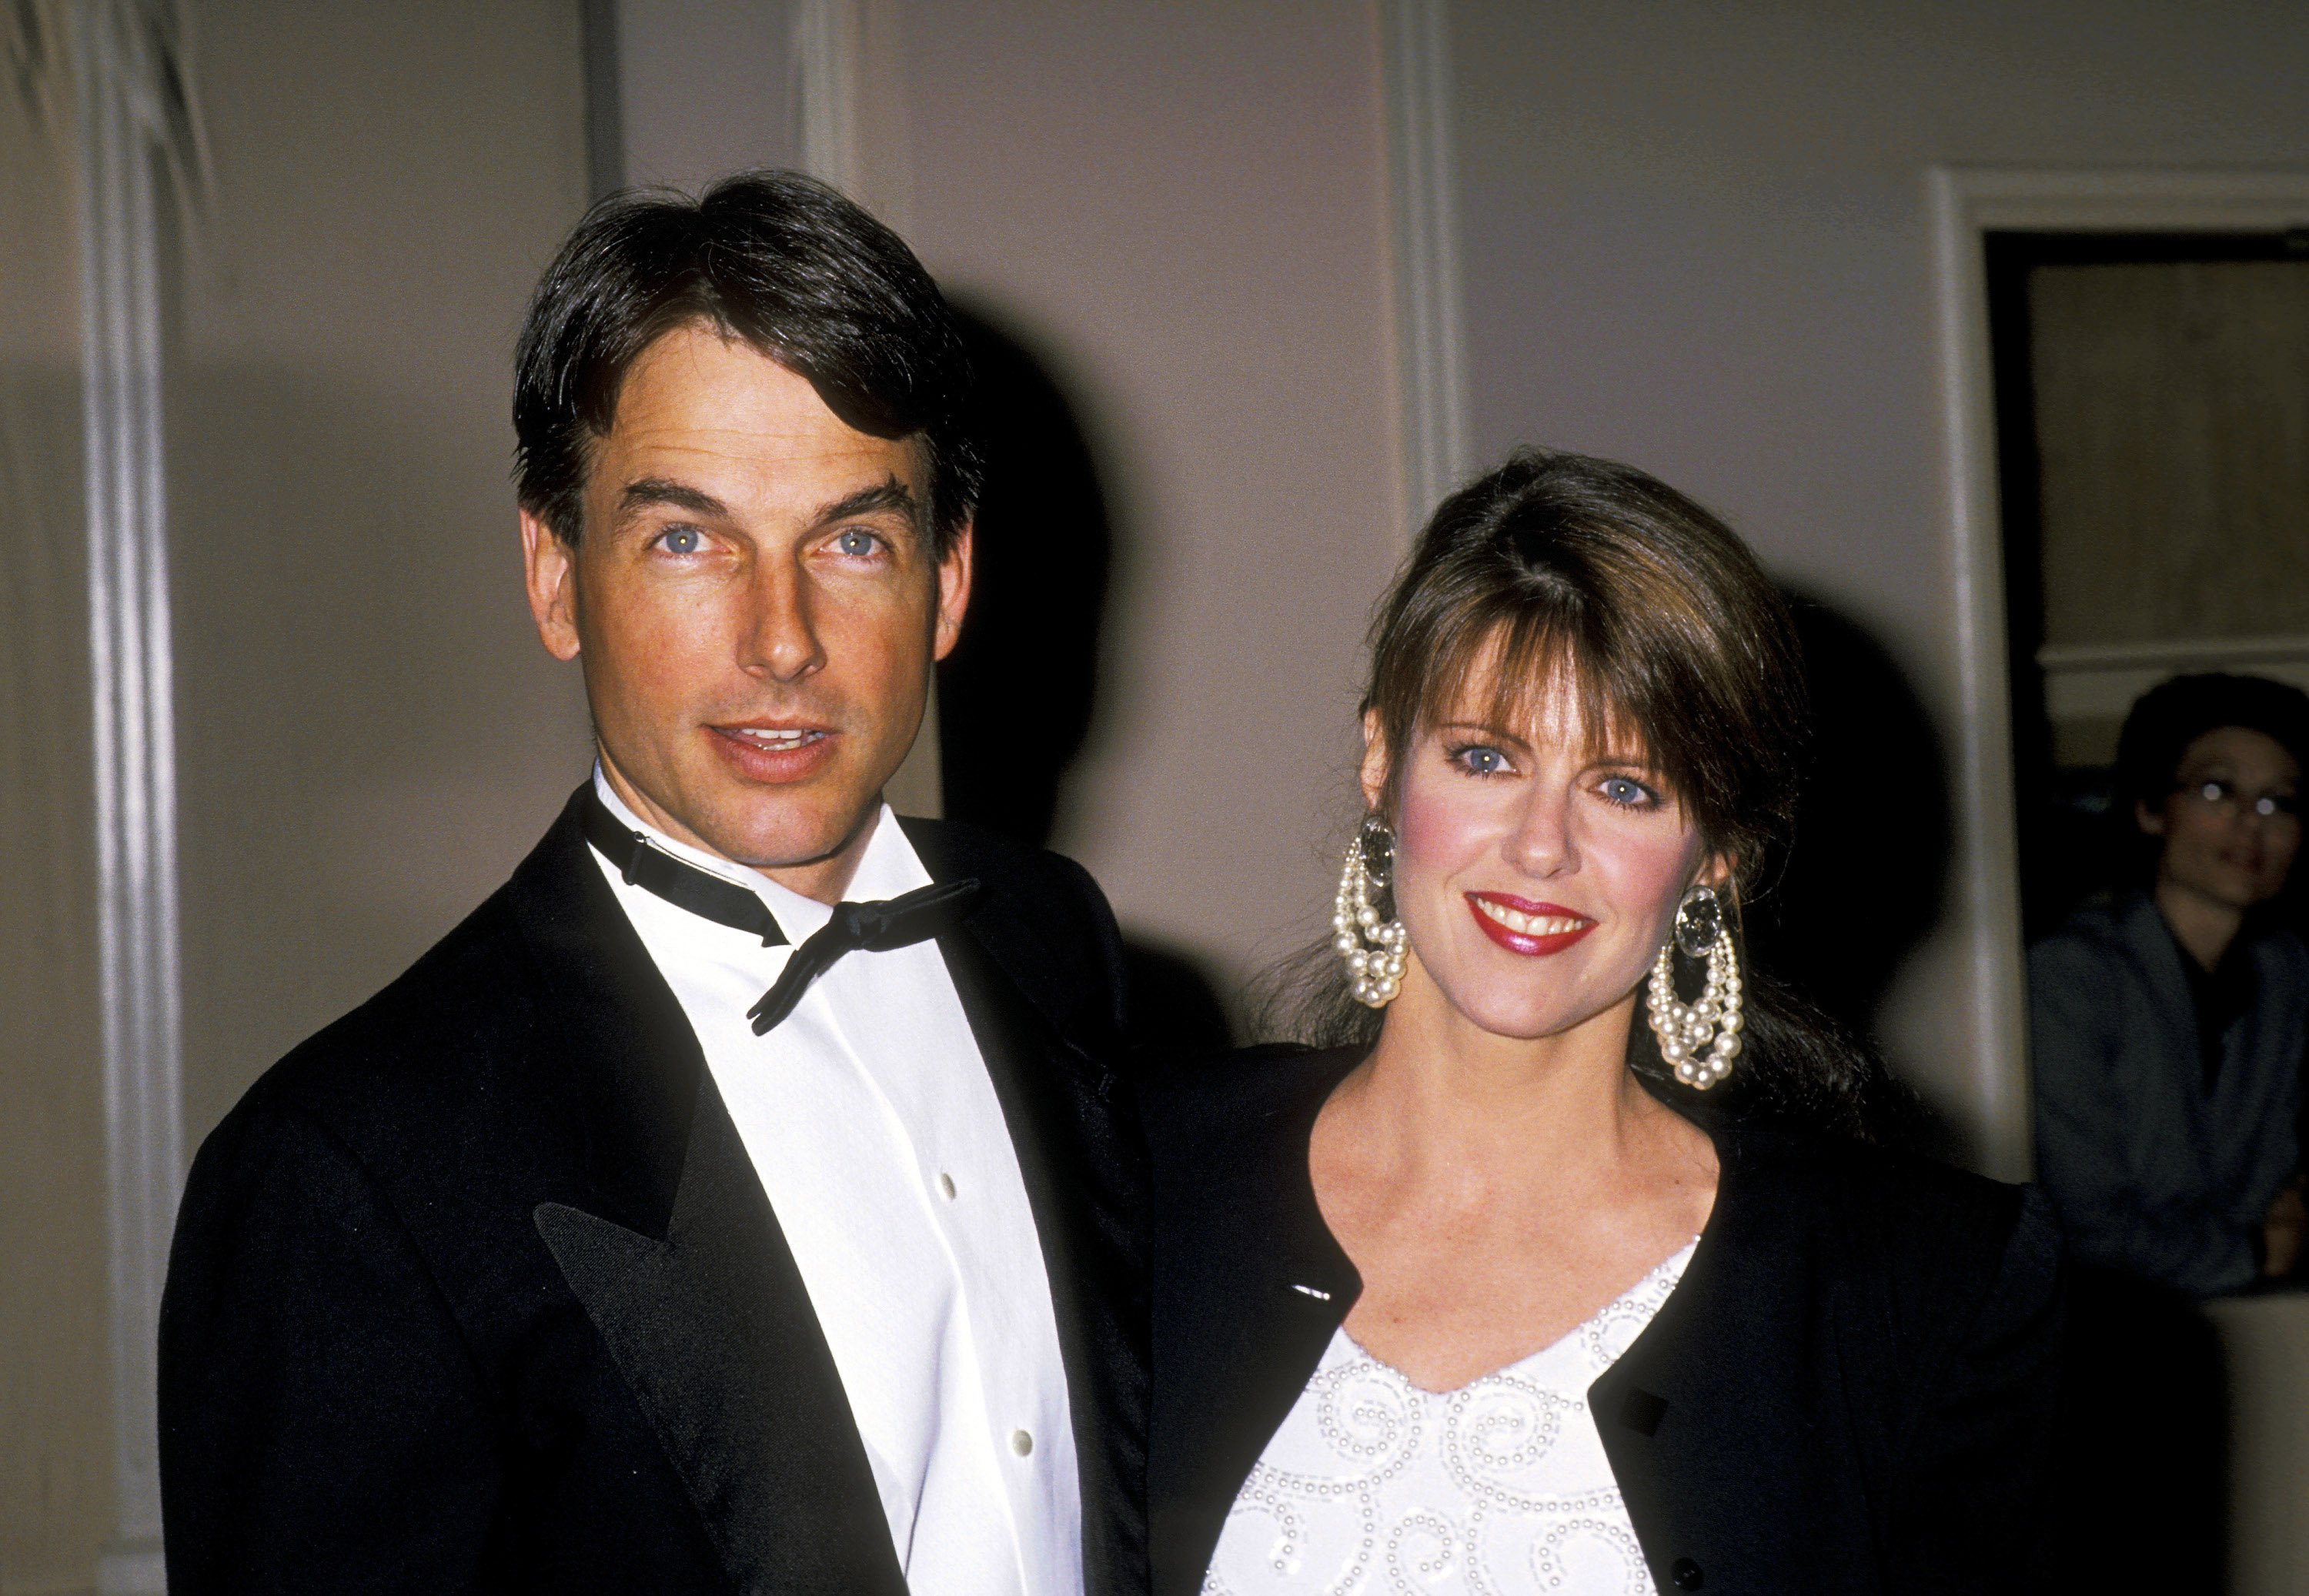 Mark Harmon and Pam Dawber, 1989 | Source: Getty Images